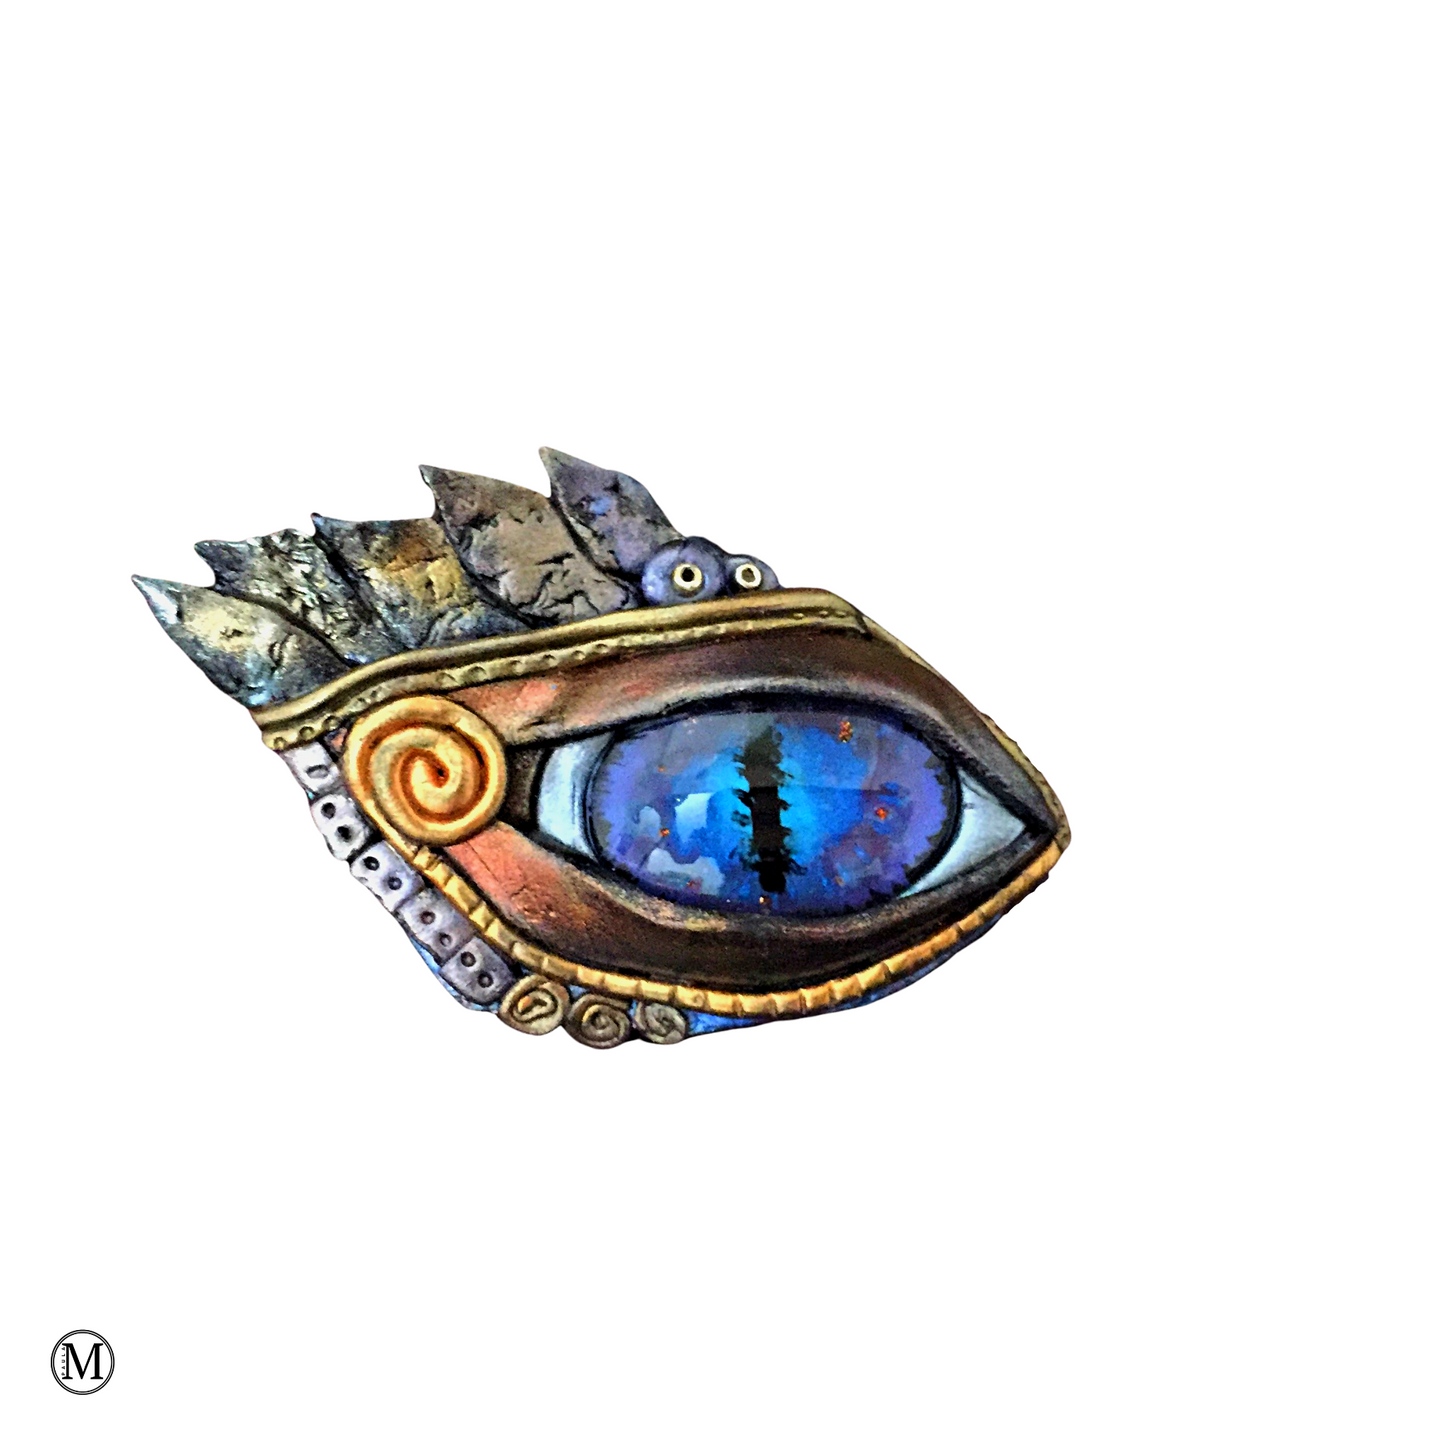 egyptian blue eye brooch with gold and bronze feather details and gold swirl at corner of the eye.